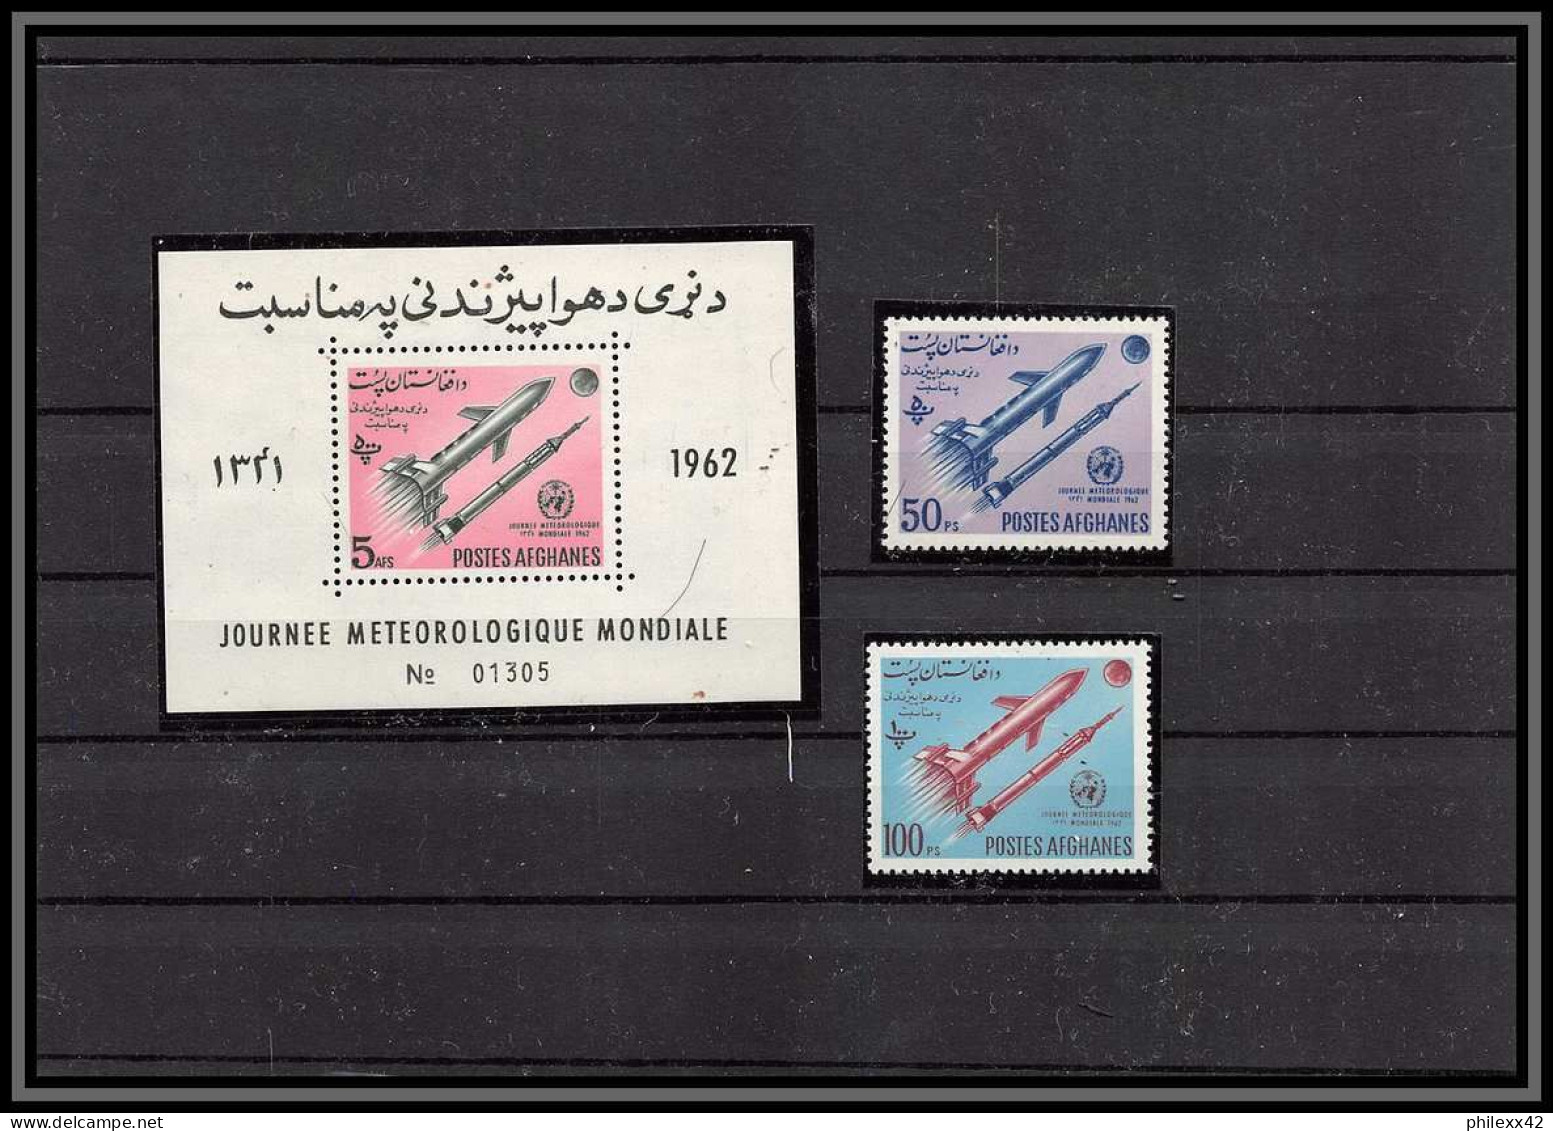 2752 Espace (space) Lettre Cover Afghanistan Postes Afghanes JOURNEE METEOROLOGIQUE MONDIALE Fdc + ** Mnh 693/69 Bloc 33 - Asia